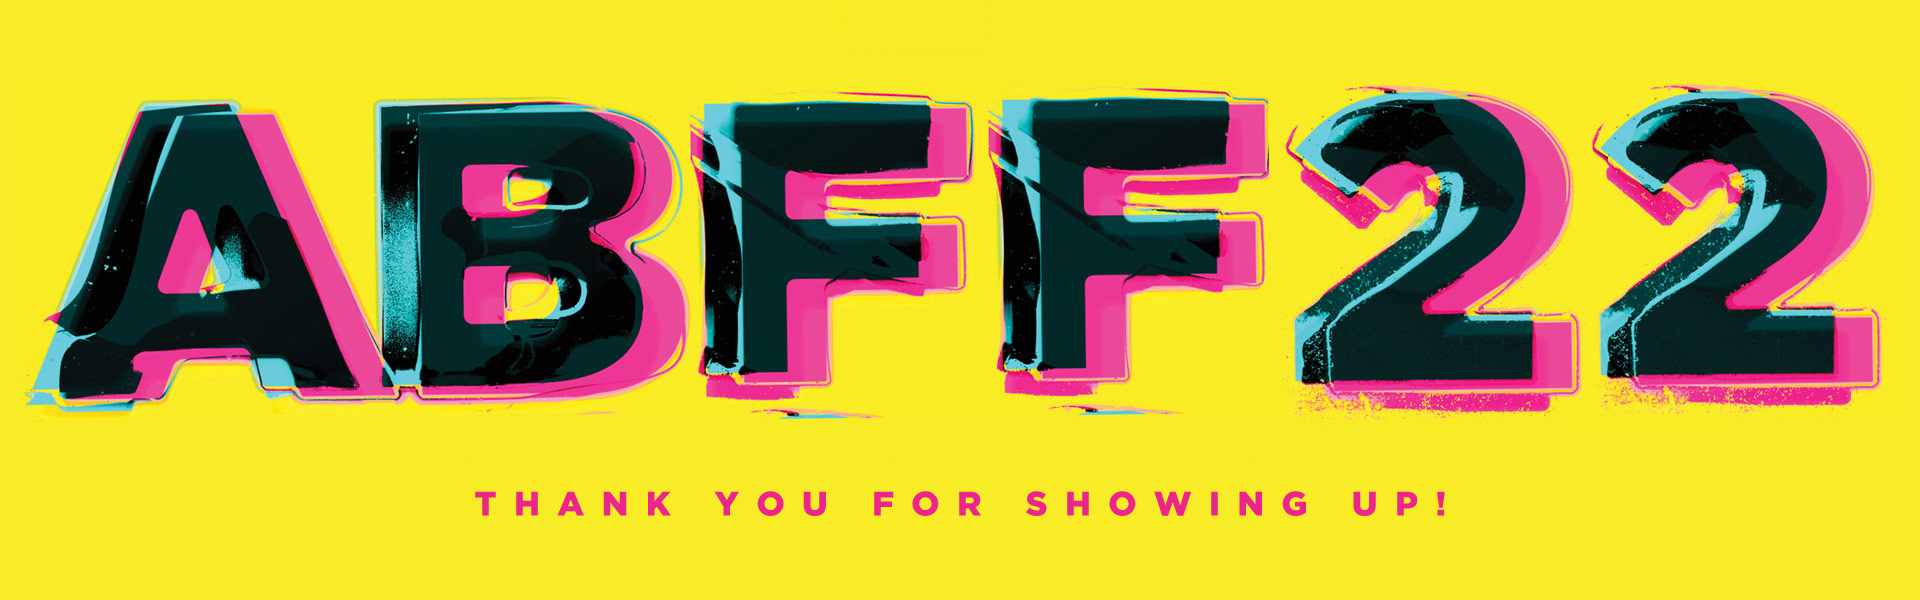 ABFF22 - Thank you for showing up!